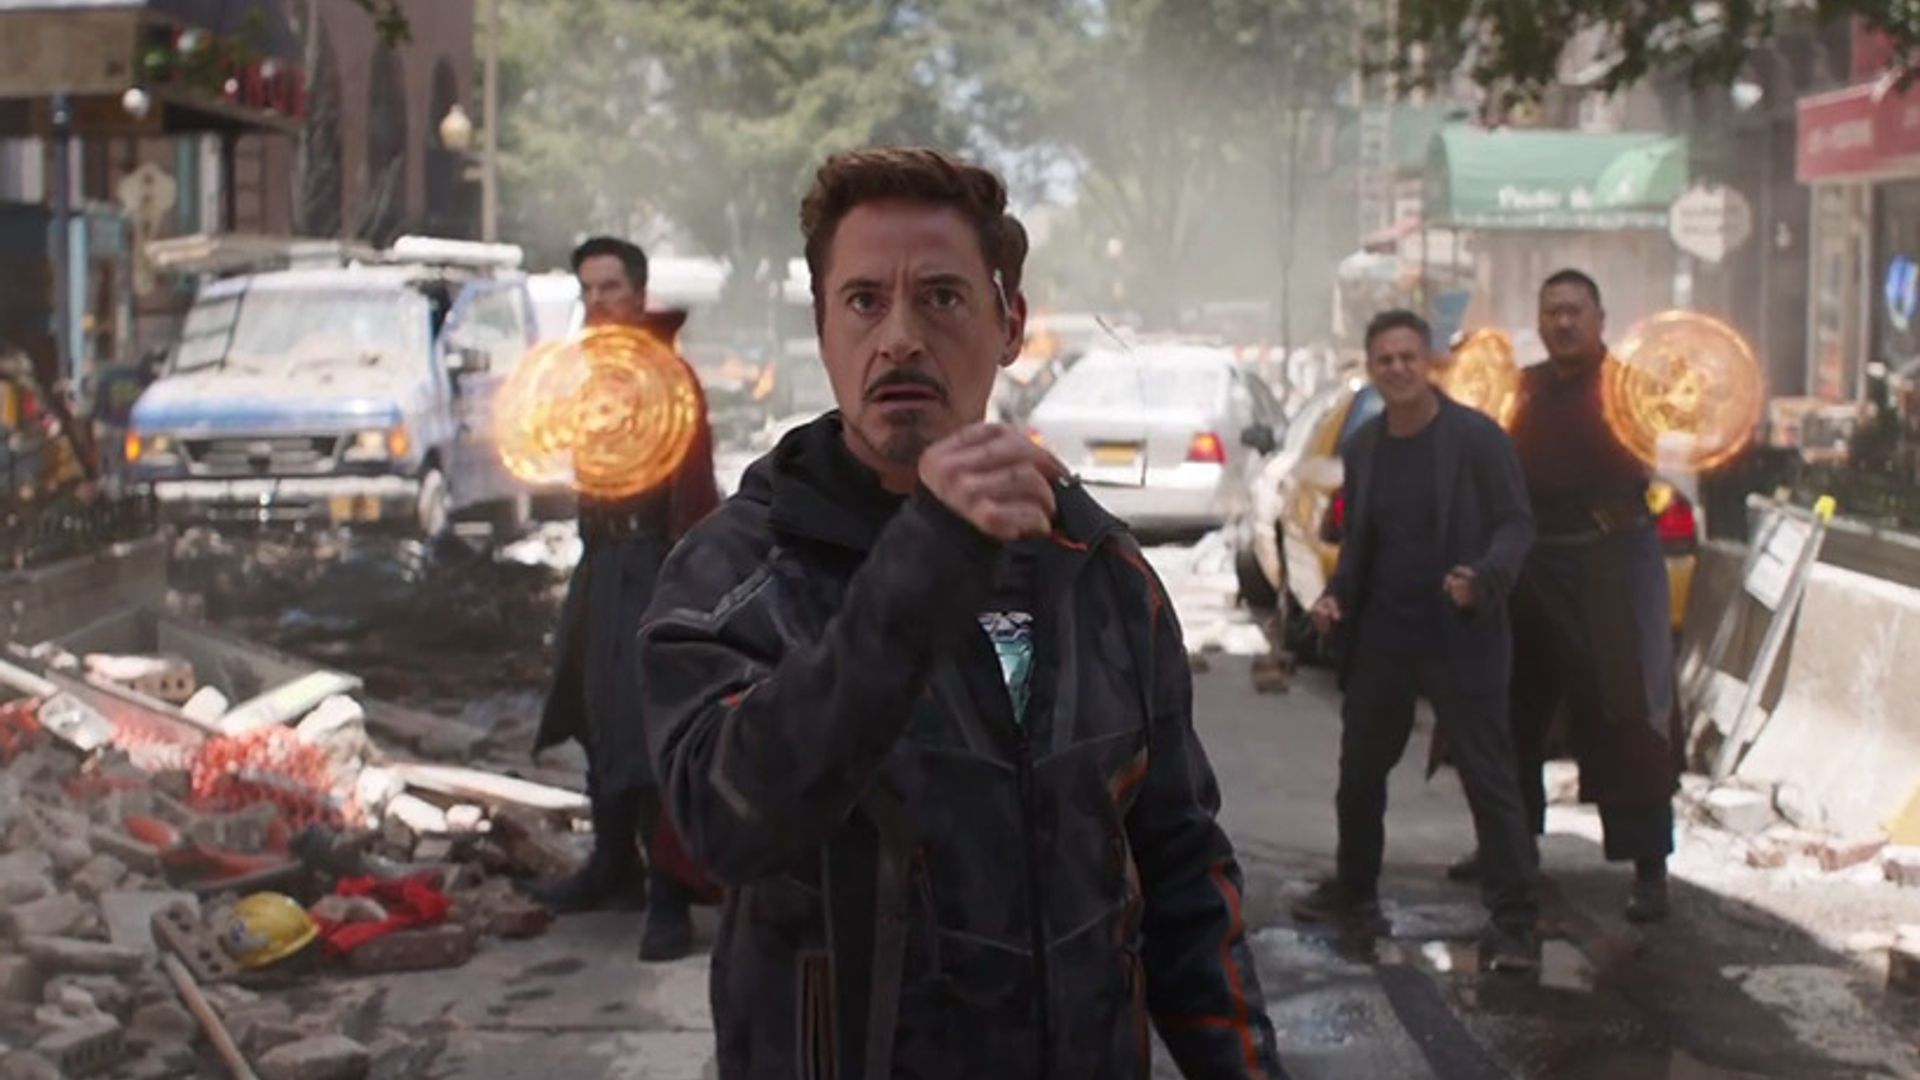 WATCH: Trailer for 2018's most anticipated film, Avengers: Infinity War, is here